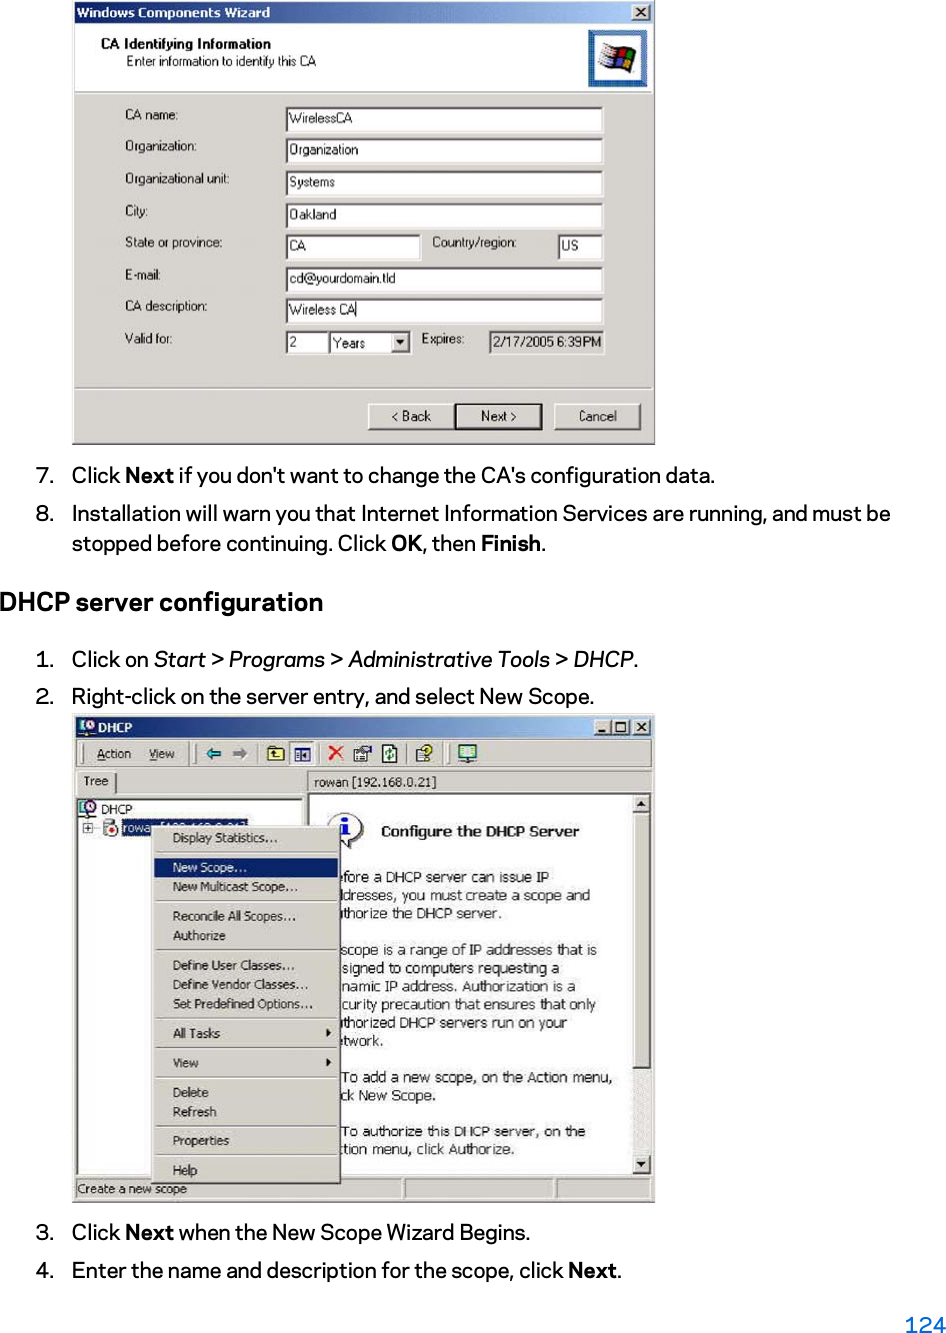 7. Click Next if you don&apos;t want to change the CA&apos;s configuration data.  8. Installation will warn you that Internet Information Services are running, and must be stopped before continuing. Click OK, then Finish.  DHCP server configuration 1. Click on Start &gt; Programs &gt; Administrative Tools &gt; DHCP.2. Right-click on the server entry, and select New Scope. 3. Click Next when the New Scope Wizard Begins.  4. Enter the name and description for the scope, click Next.  124